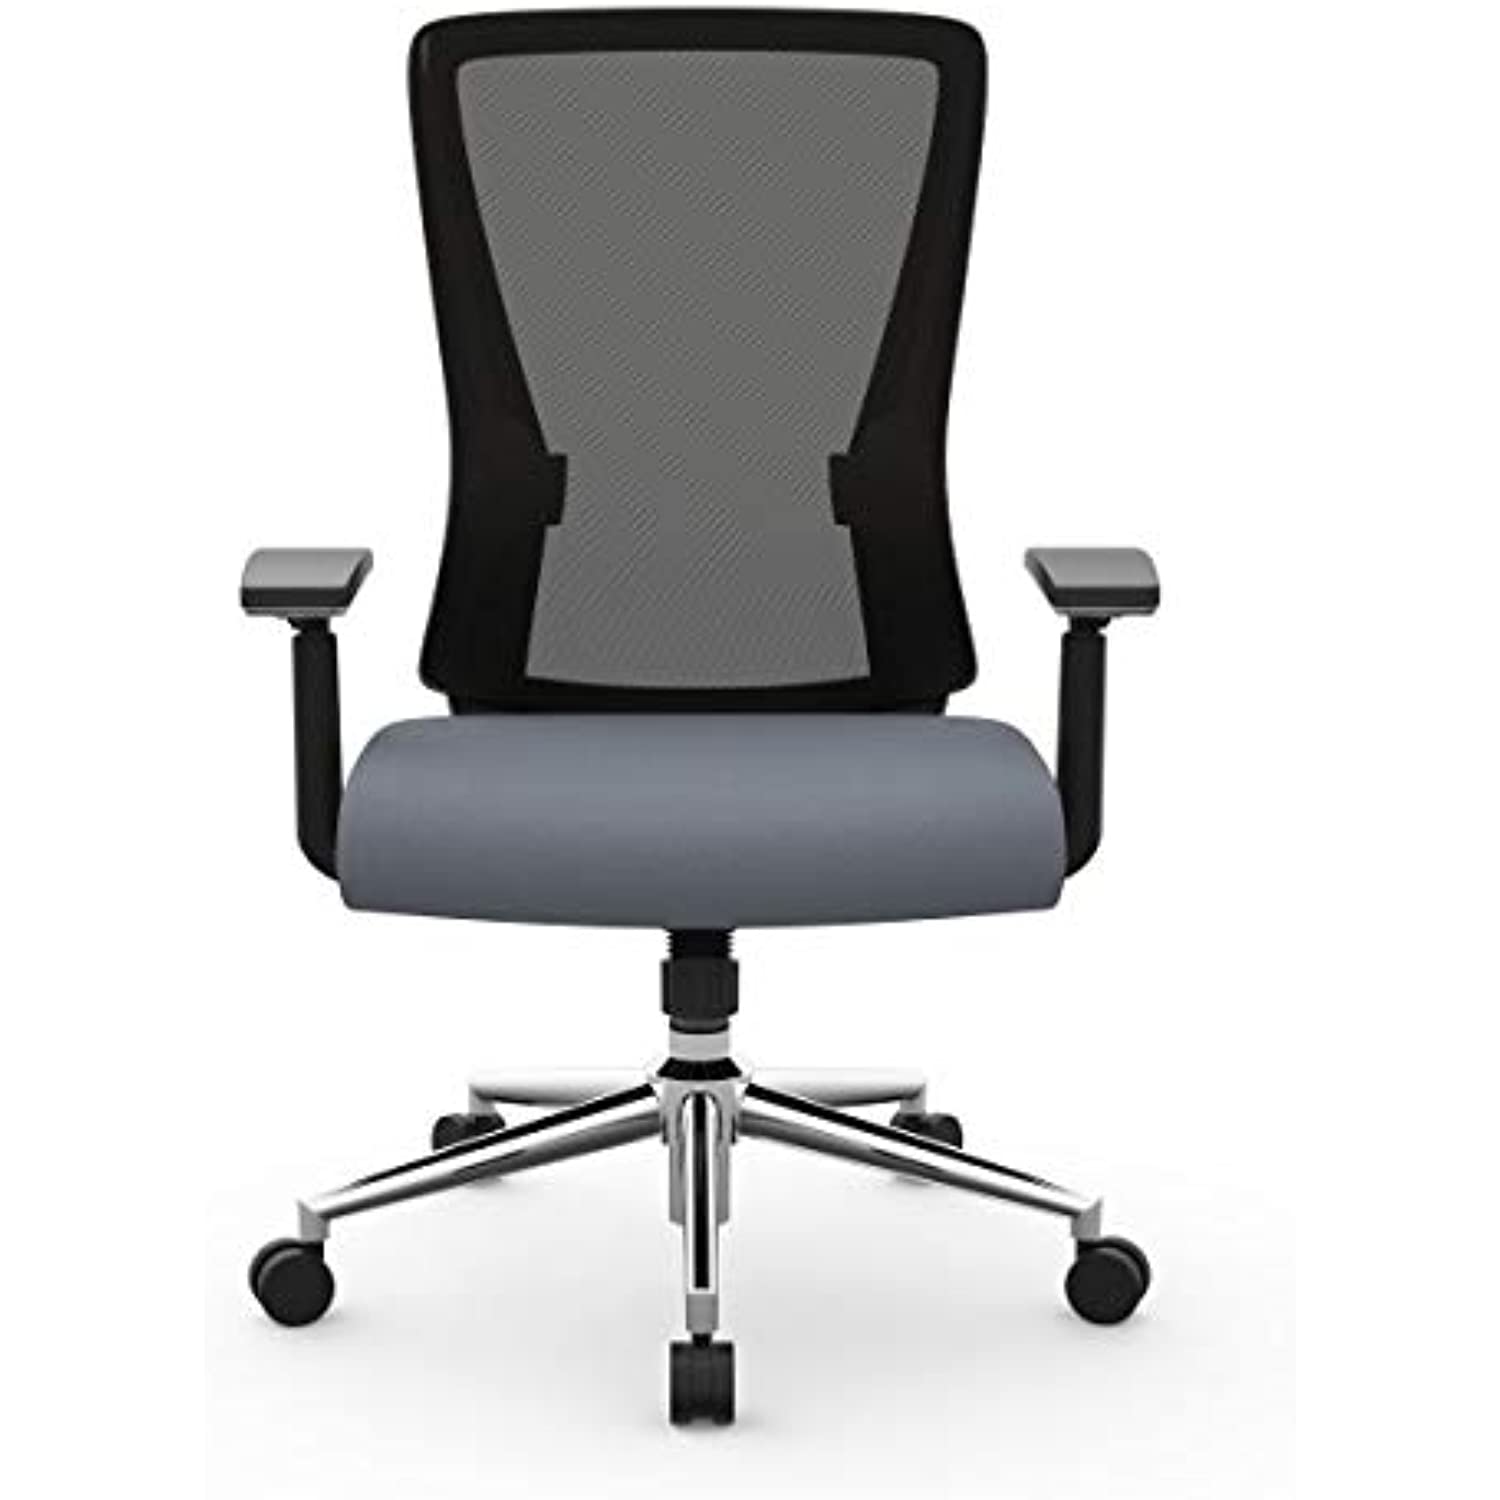 Realspace Levari Faux Leather Mid-Back Task Chair, Gray/Black - image 2 of 8